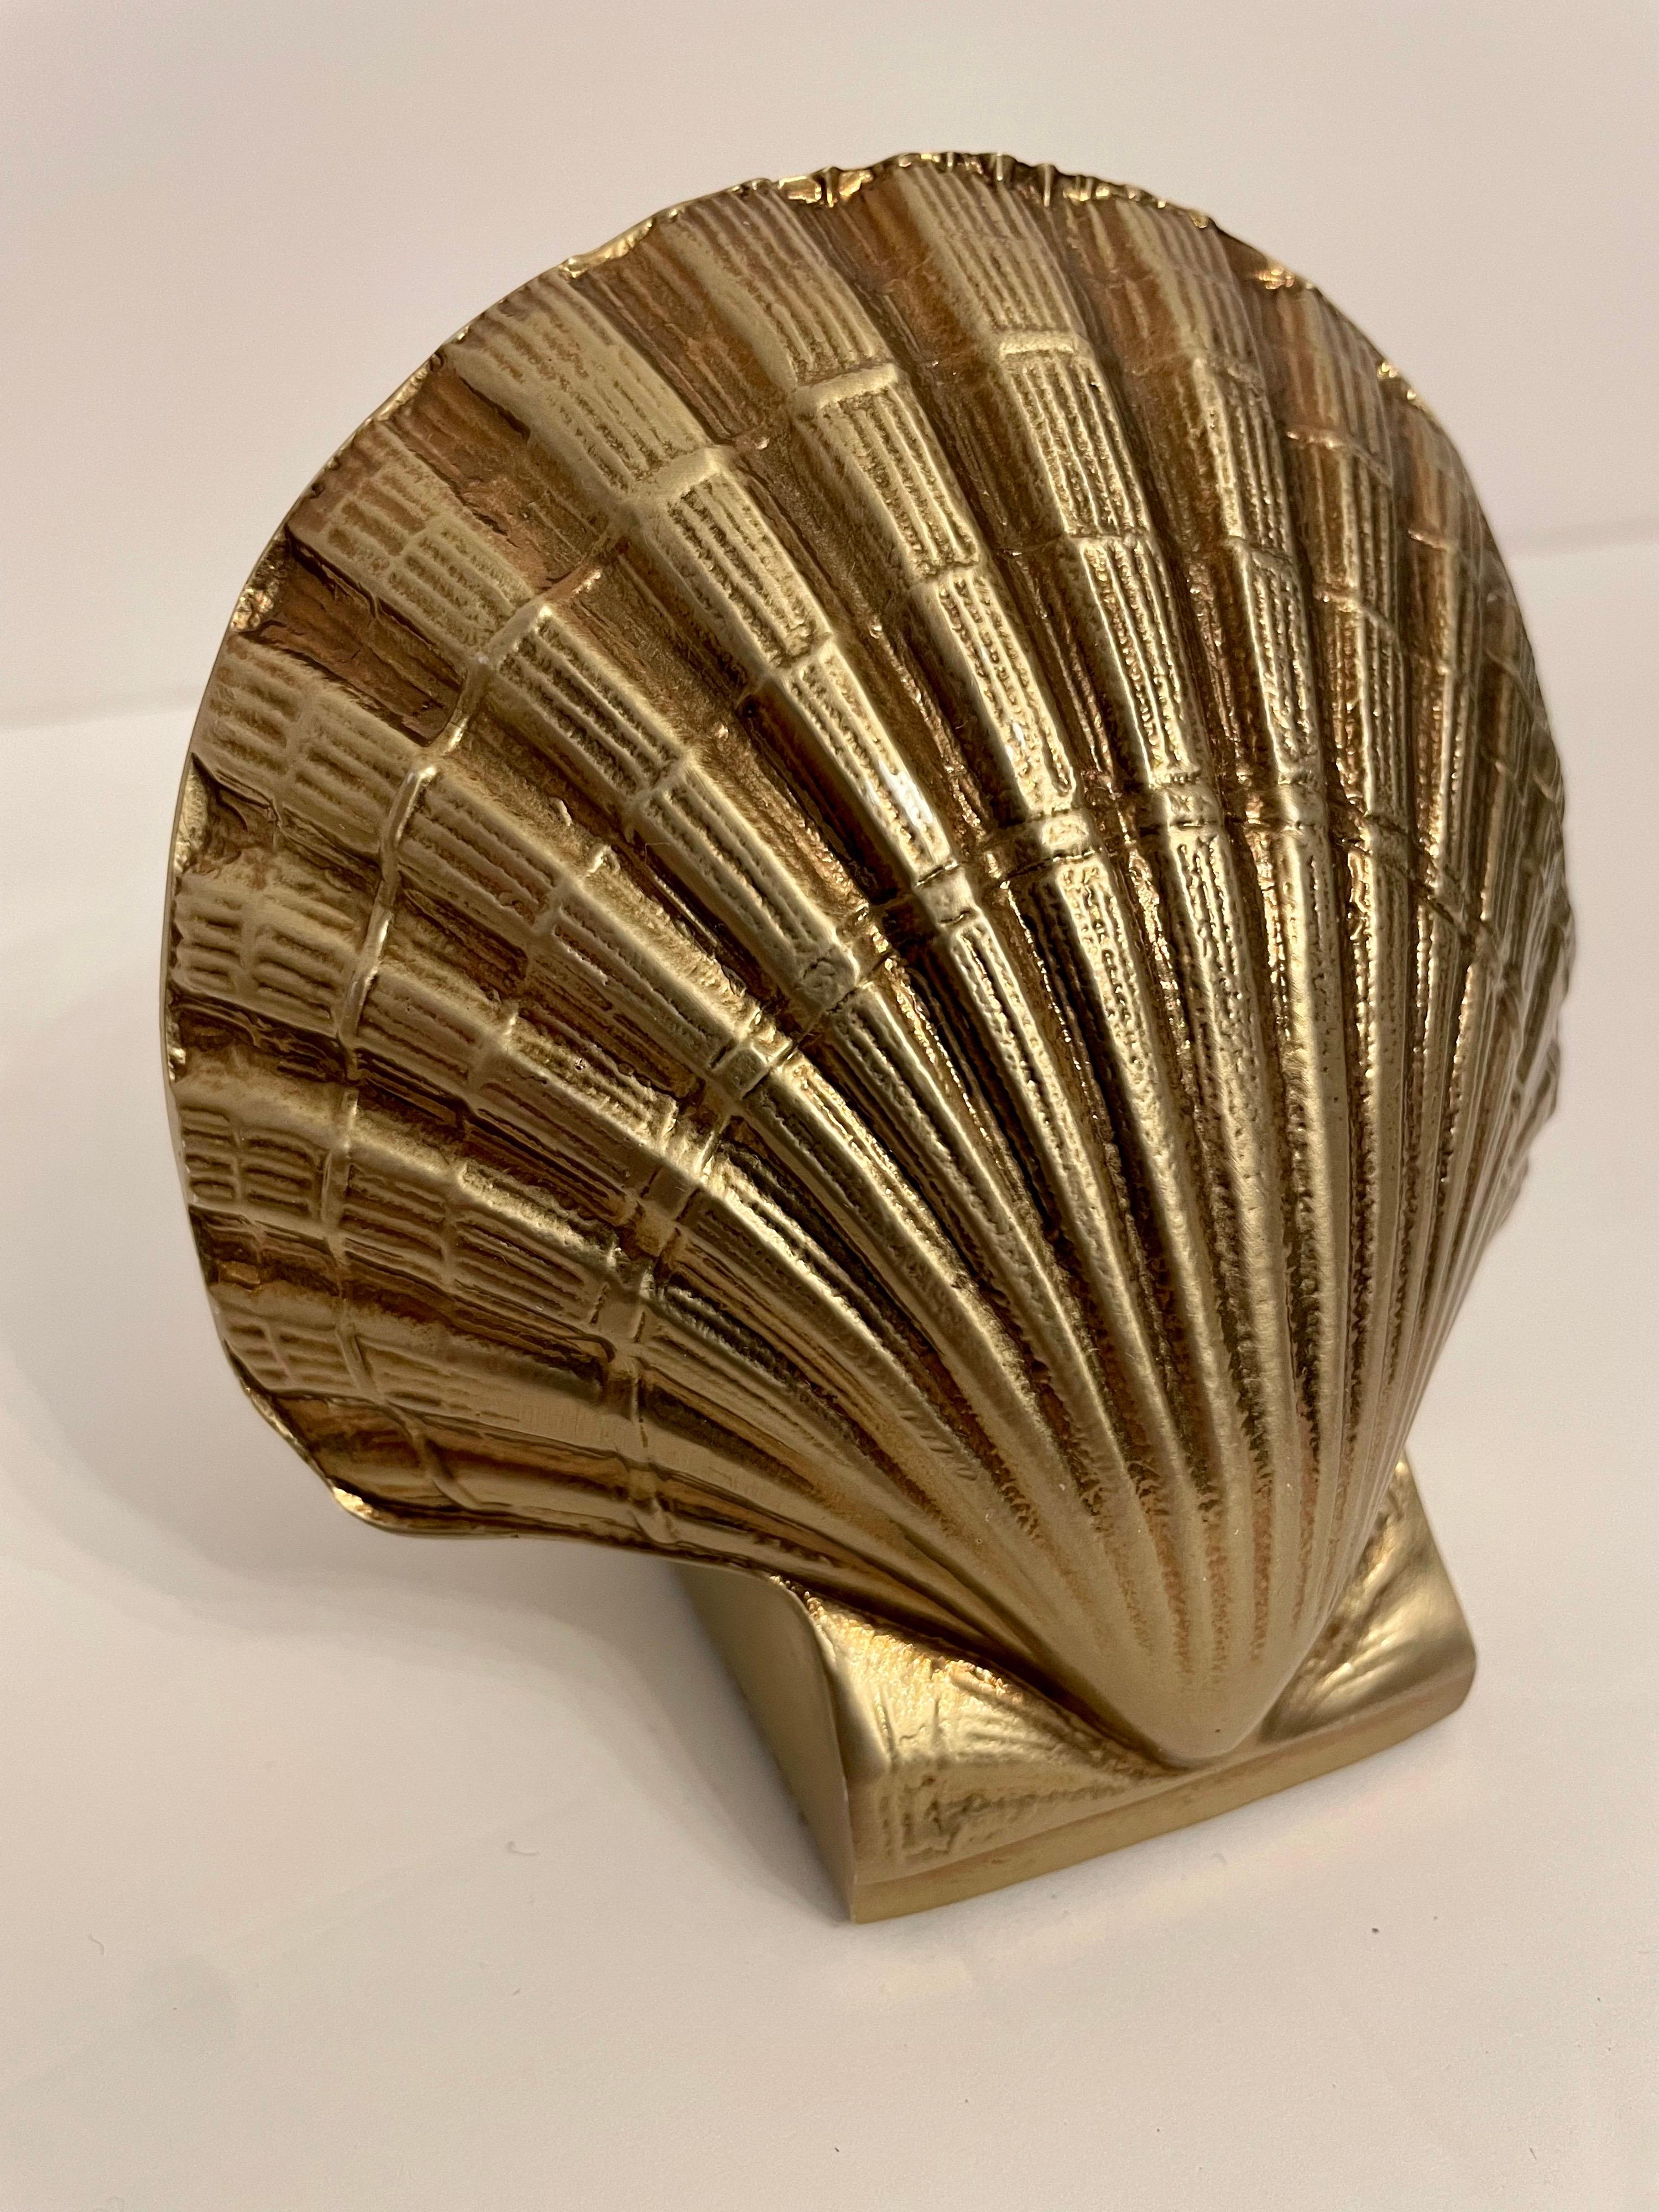 Cast Pair Brass Clam Shell Seashell Bookends